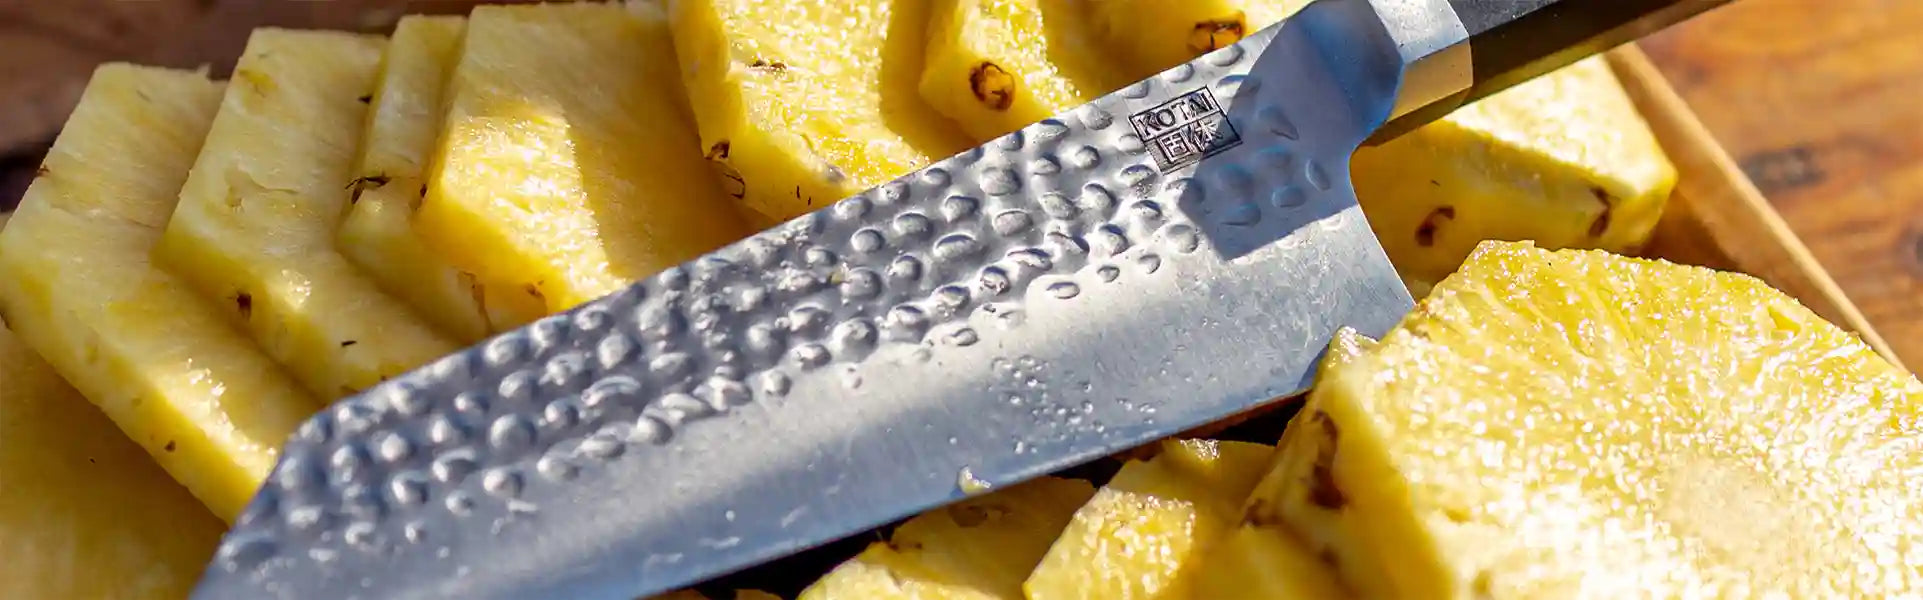 How to Sharpen A Knife With V-Rod Sharpeners For Beginners 